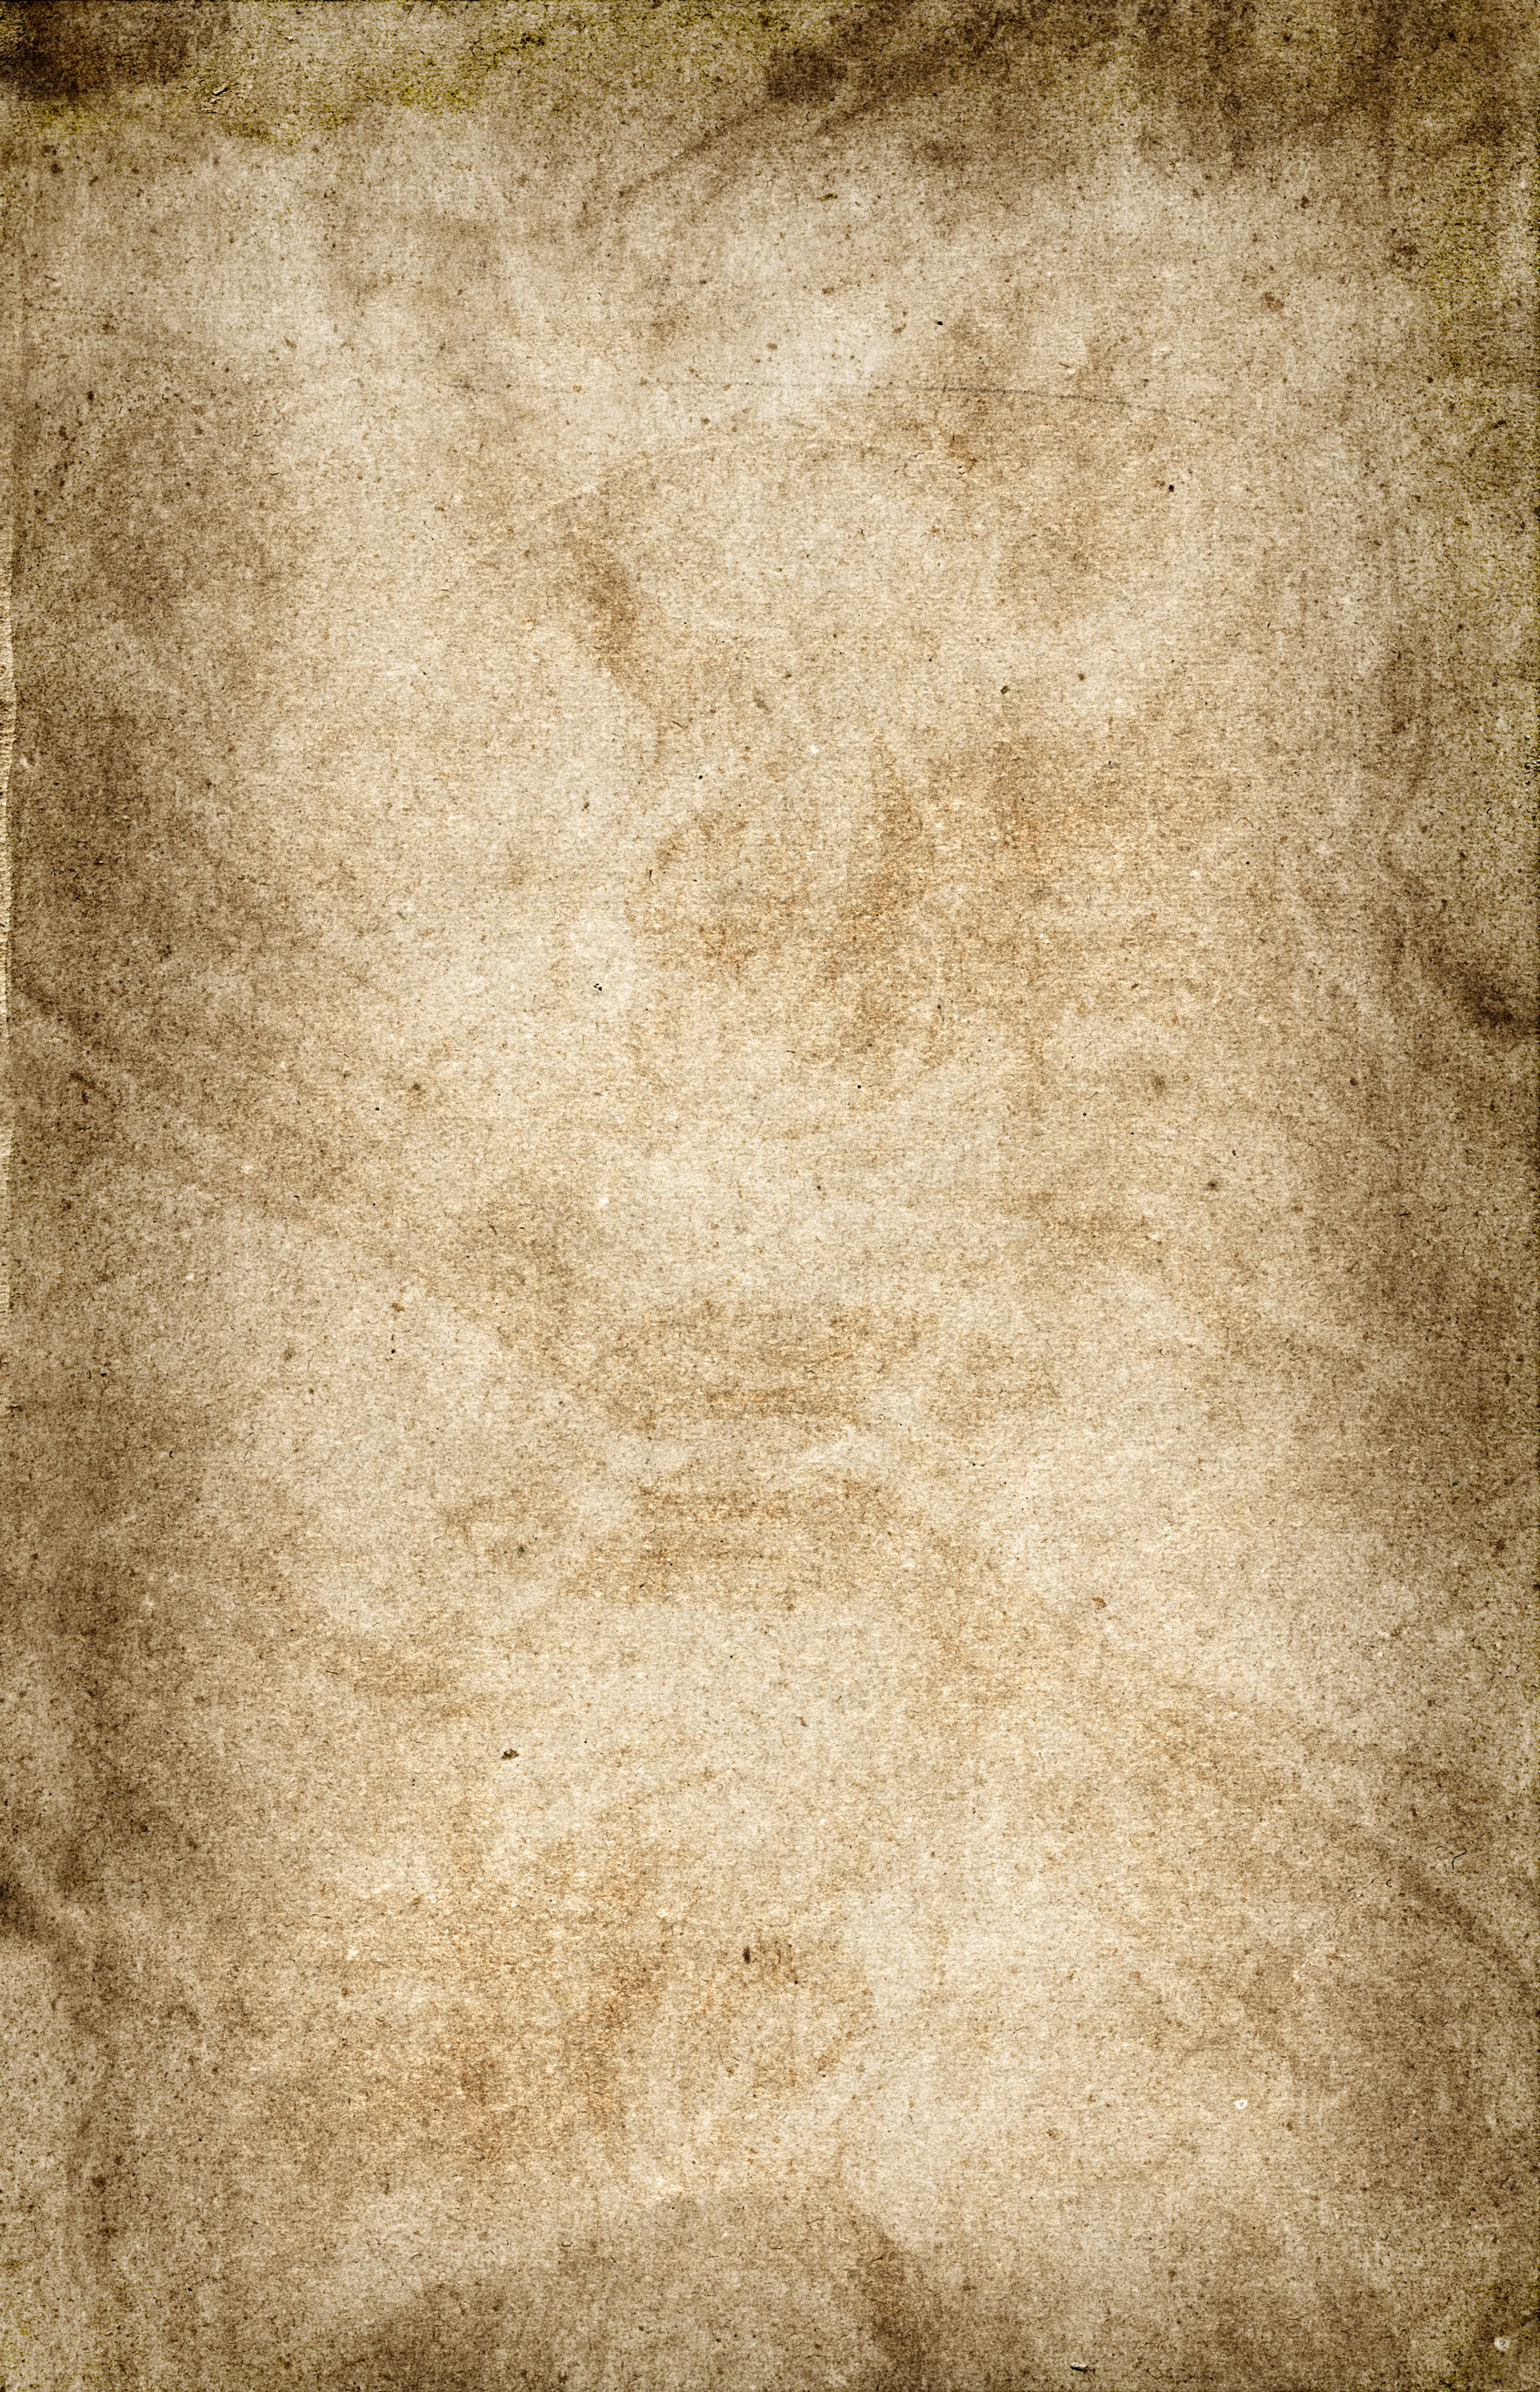 Texture paper, texture, download background, background